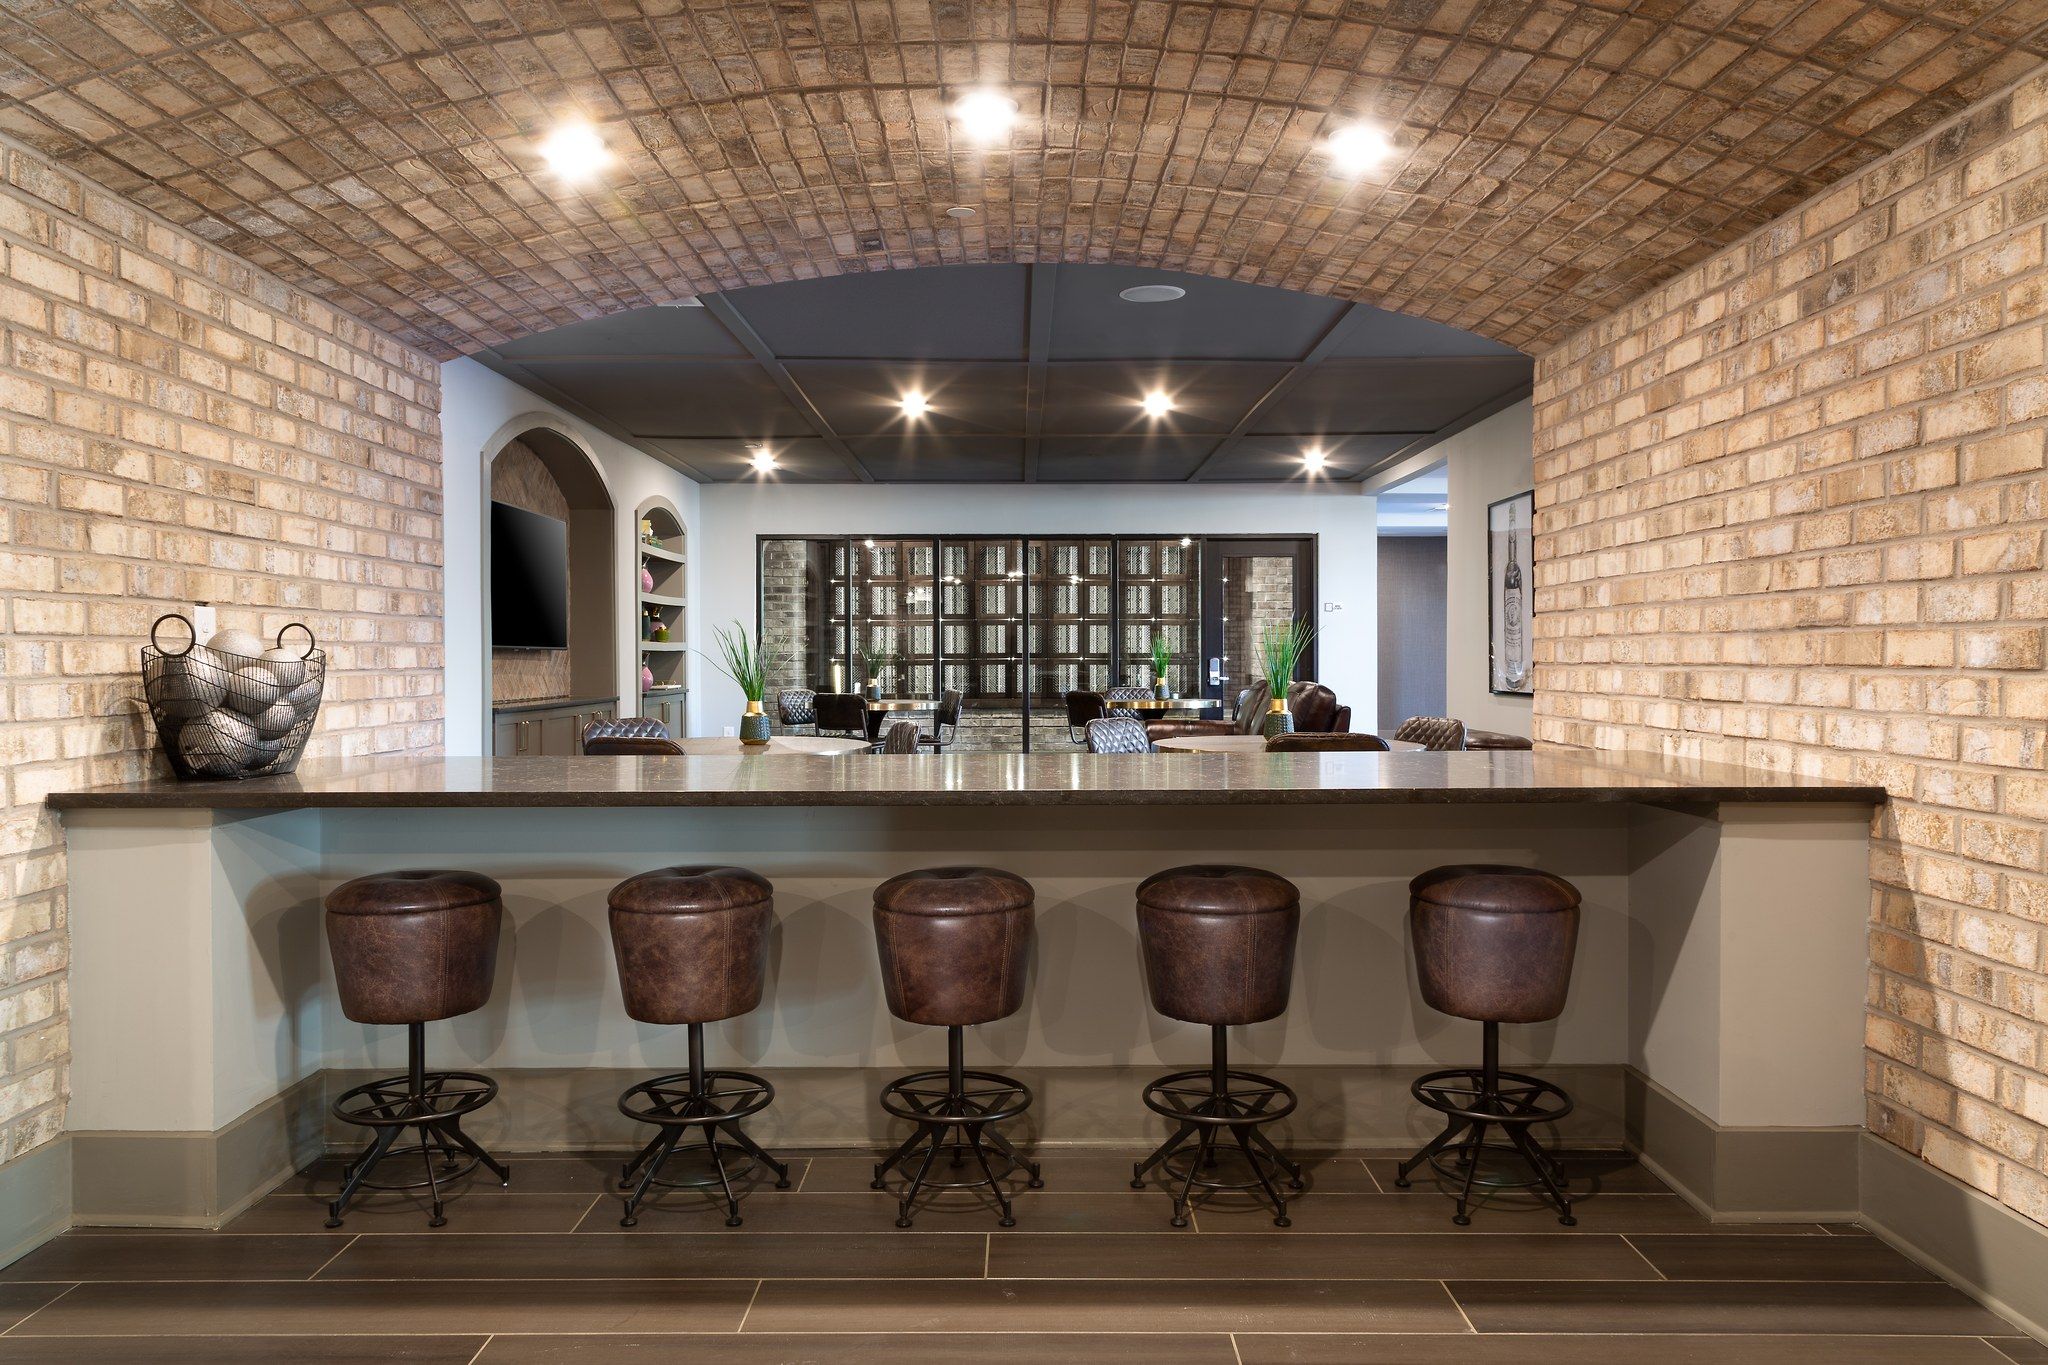 Beautiful bar area with seating, amenity lounge for residents